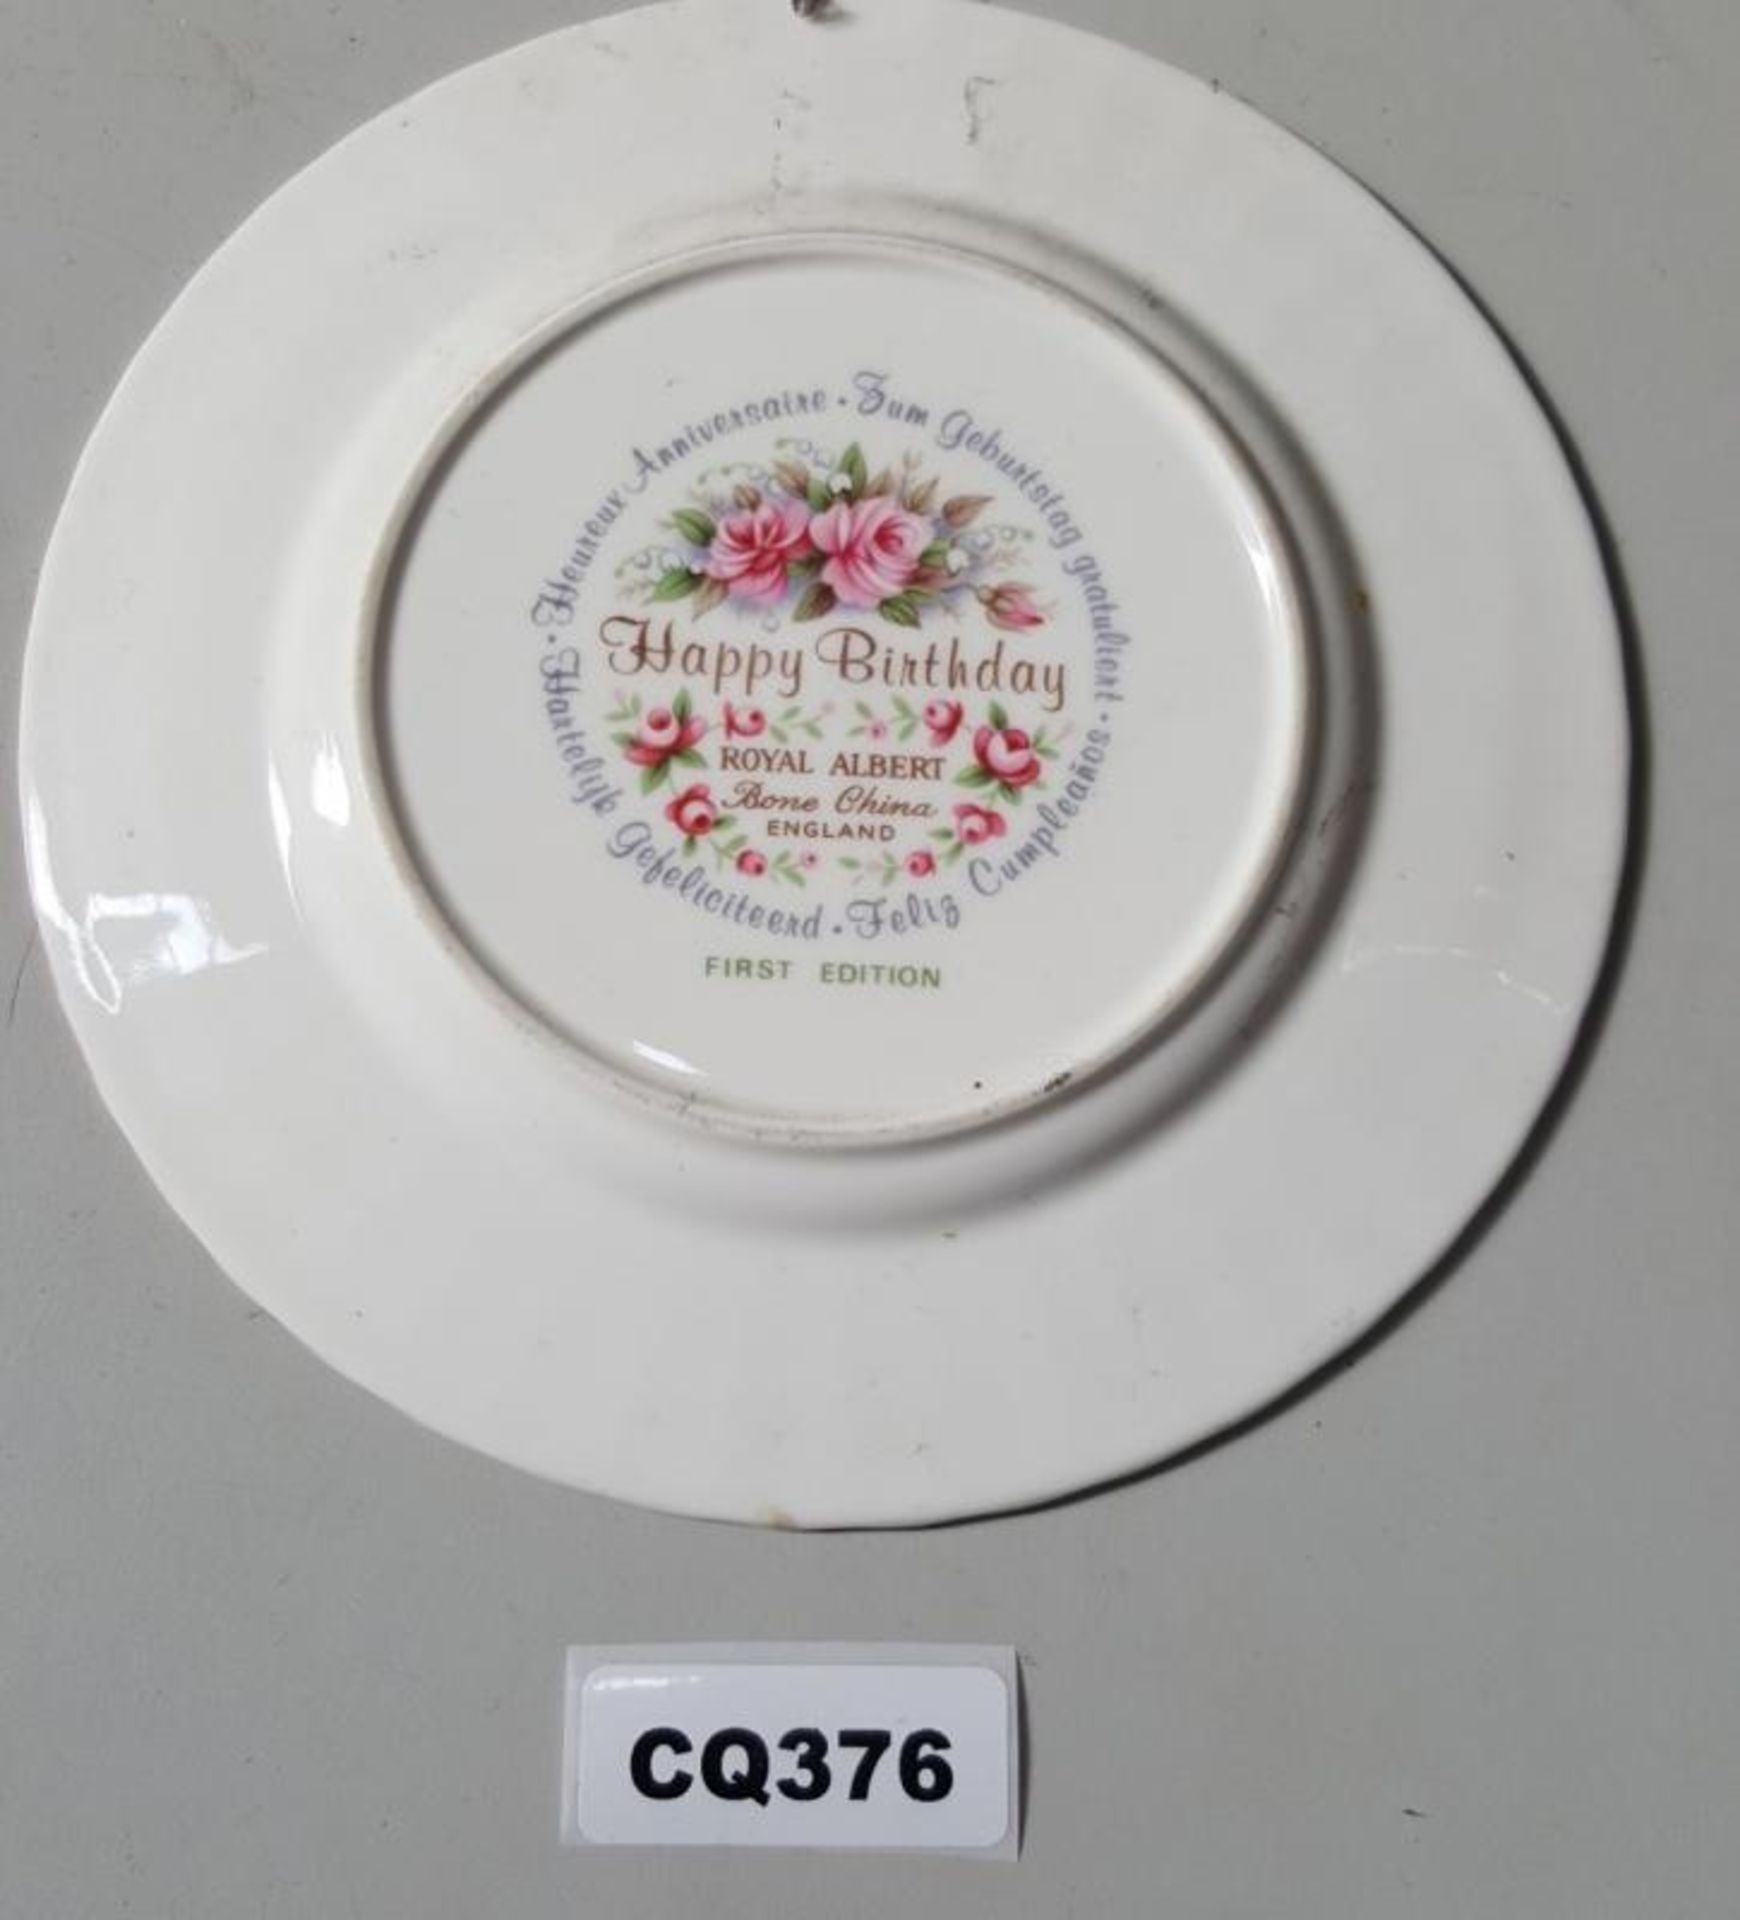 1 x ROYAL ALBERT HAPPY BIRTHDAY FIRST EDITION PLATE - PINK ROSE DESIGN - Ref CQ376 E - Dimensions:D - Image 2 of 2